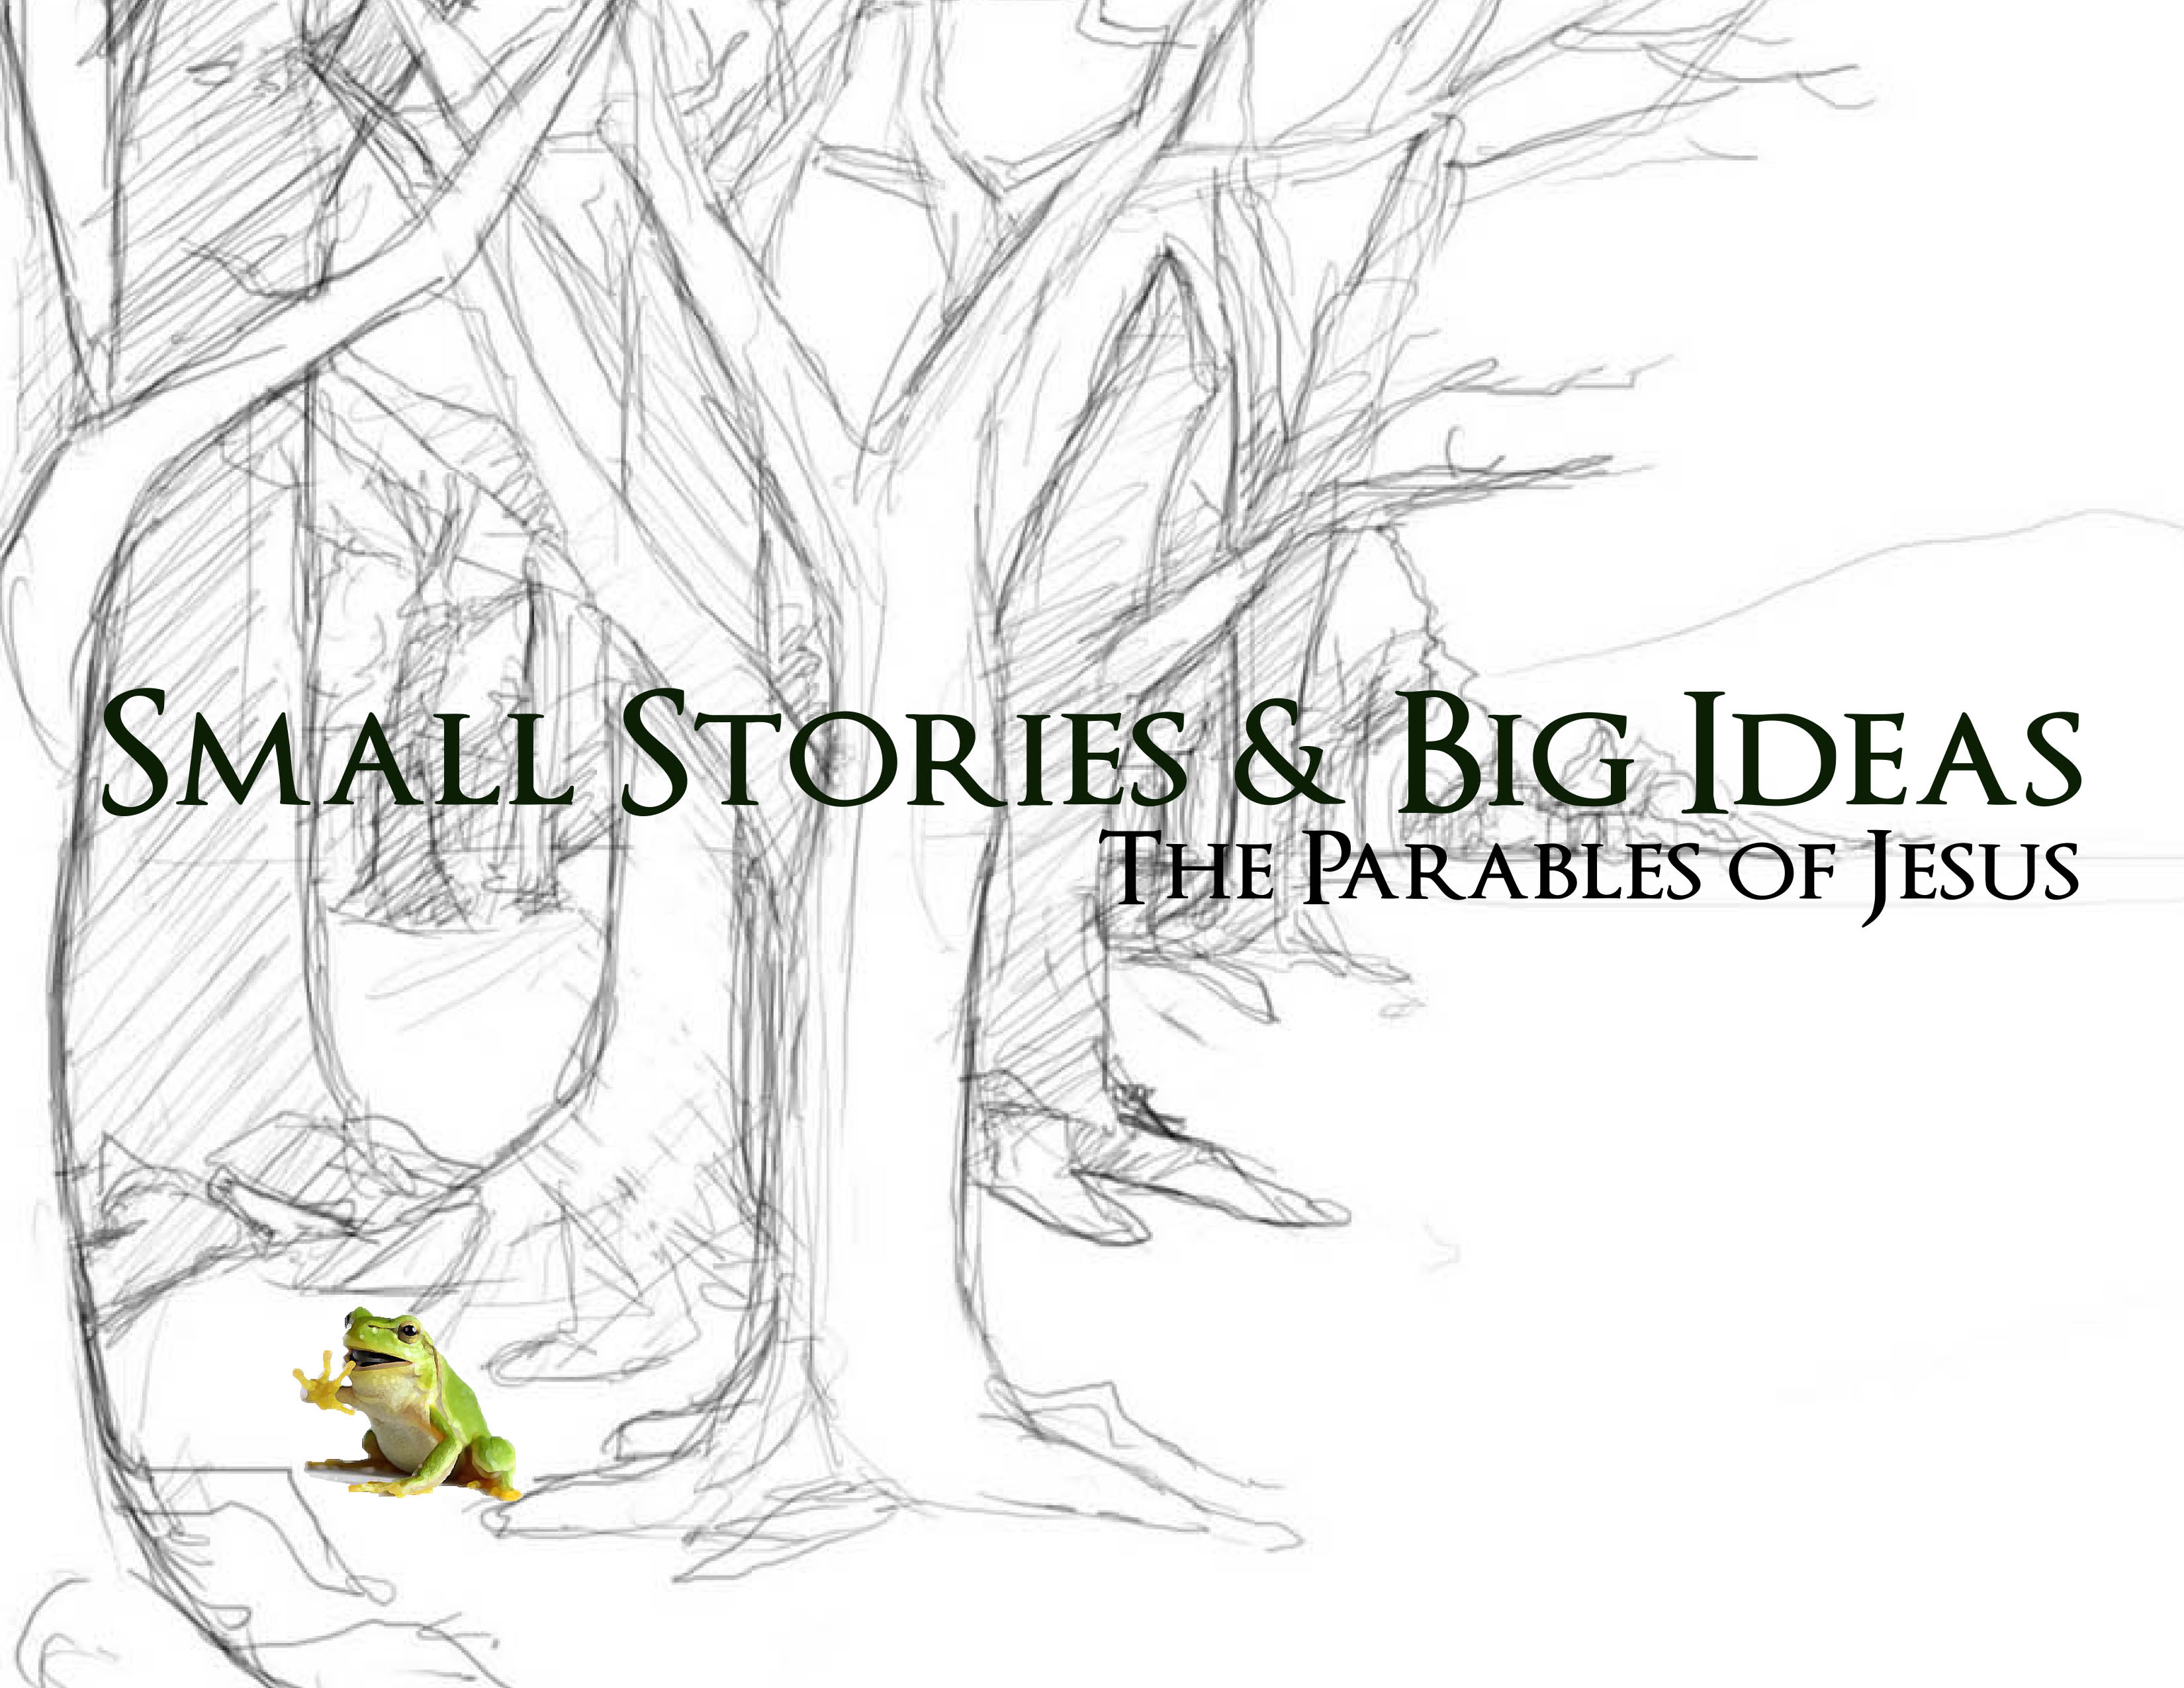 Small Stories, Big Ideas #5- A Story of Great Significance